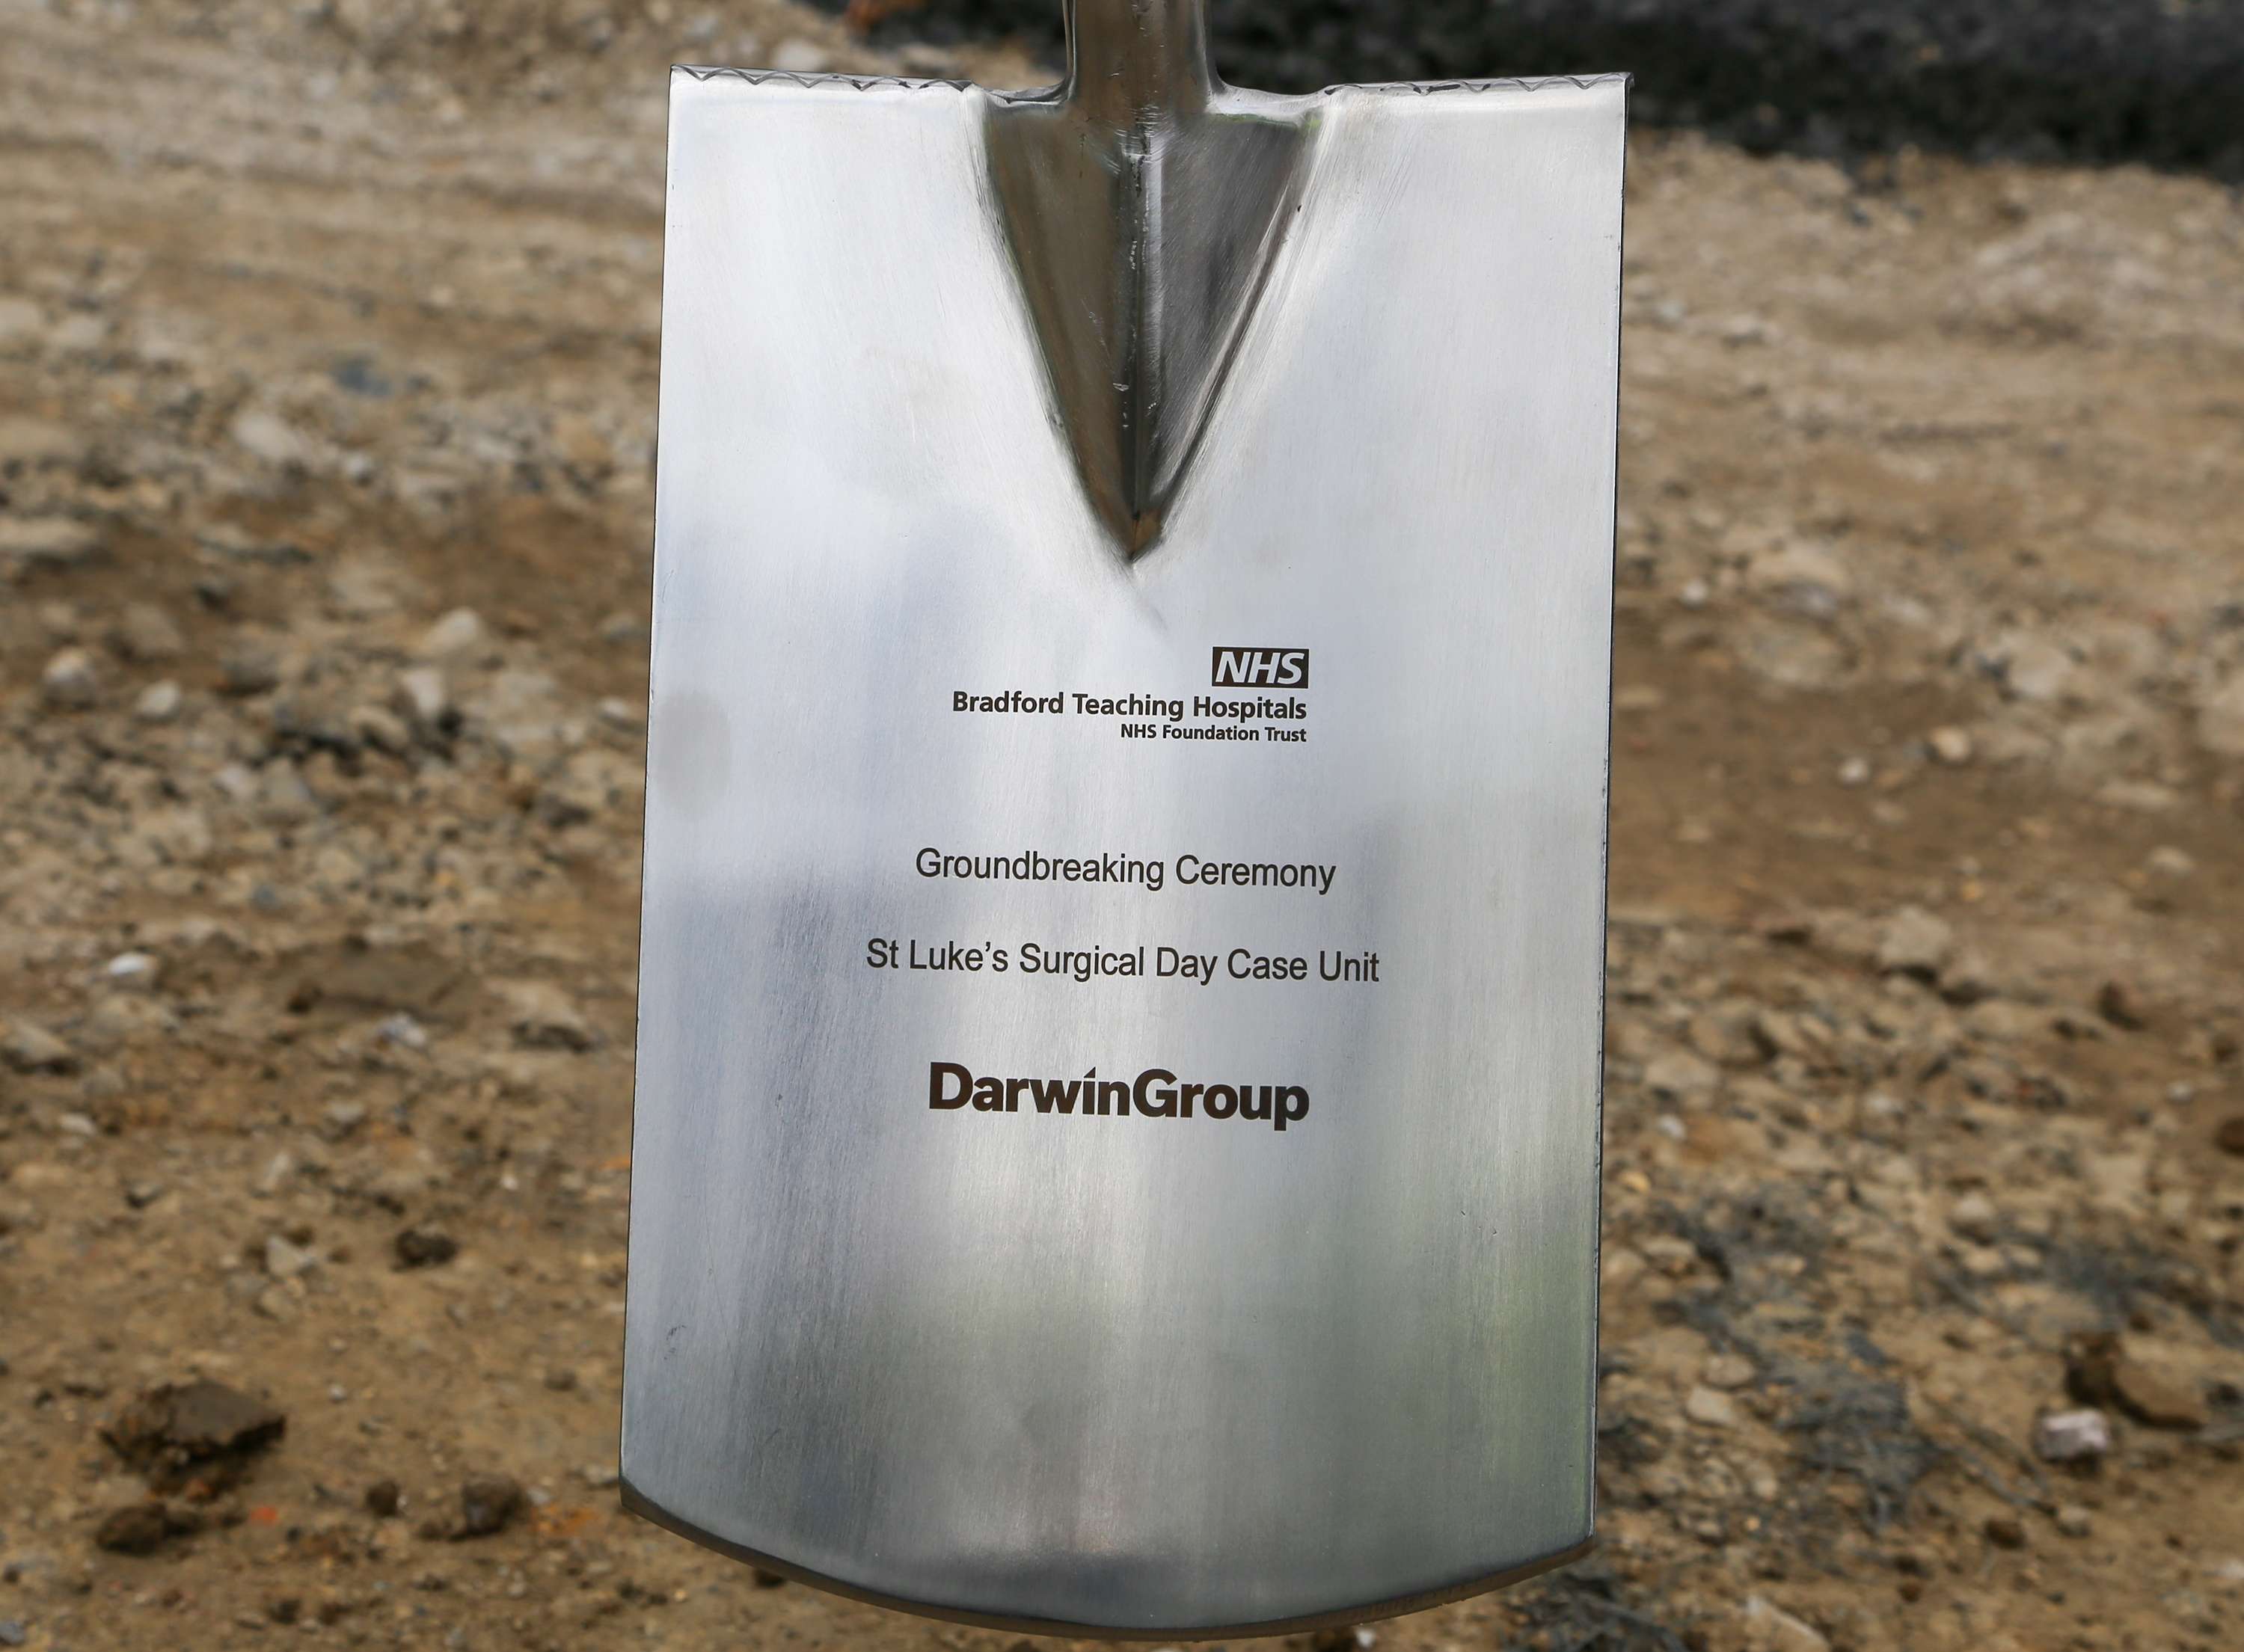 Close up image of the engraved ceremonial spade from the St Luke's ground breaking ceremony.